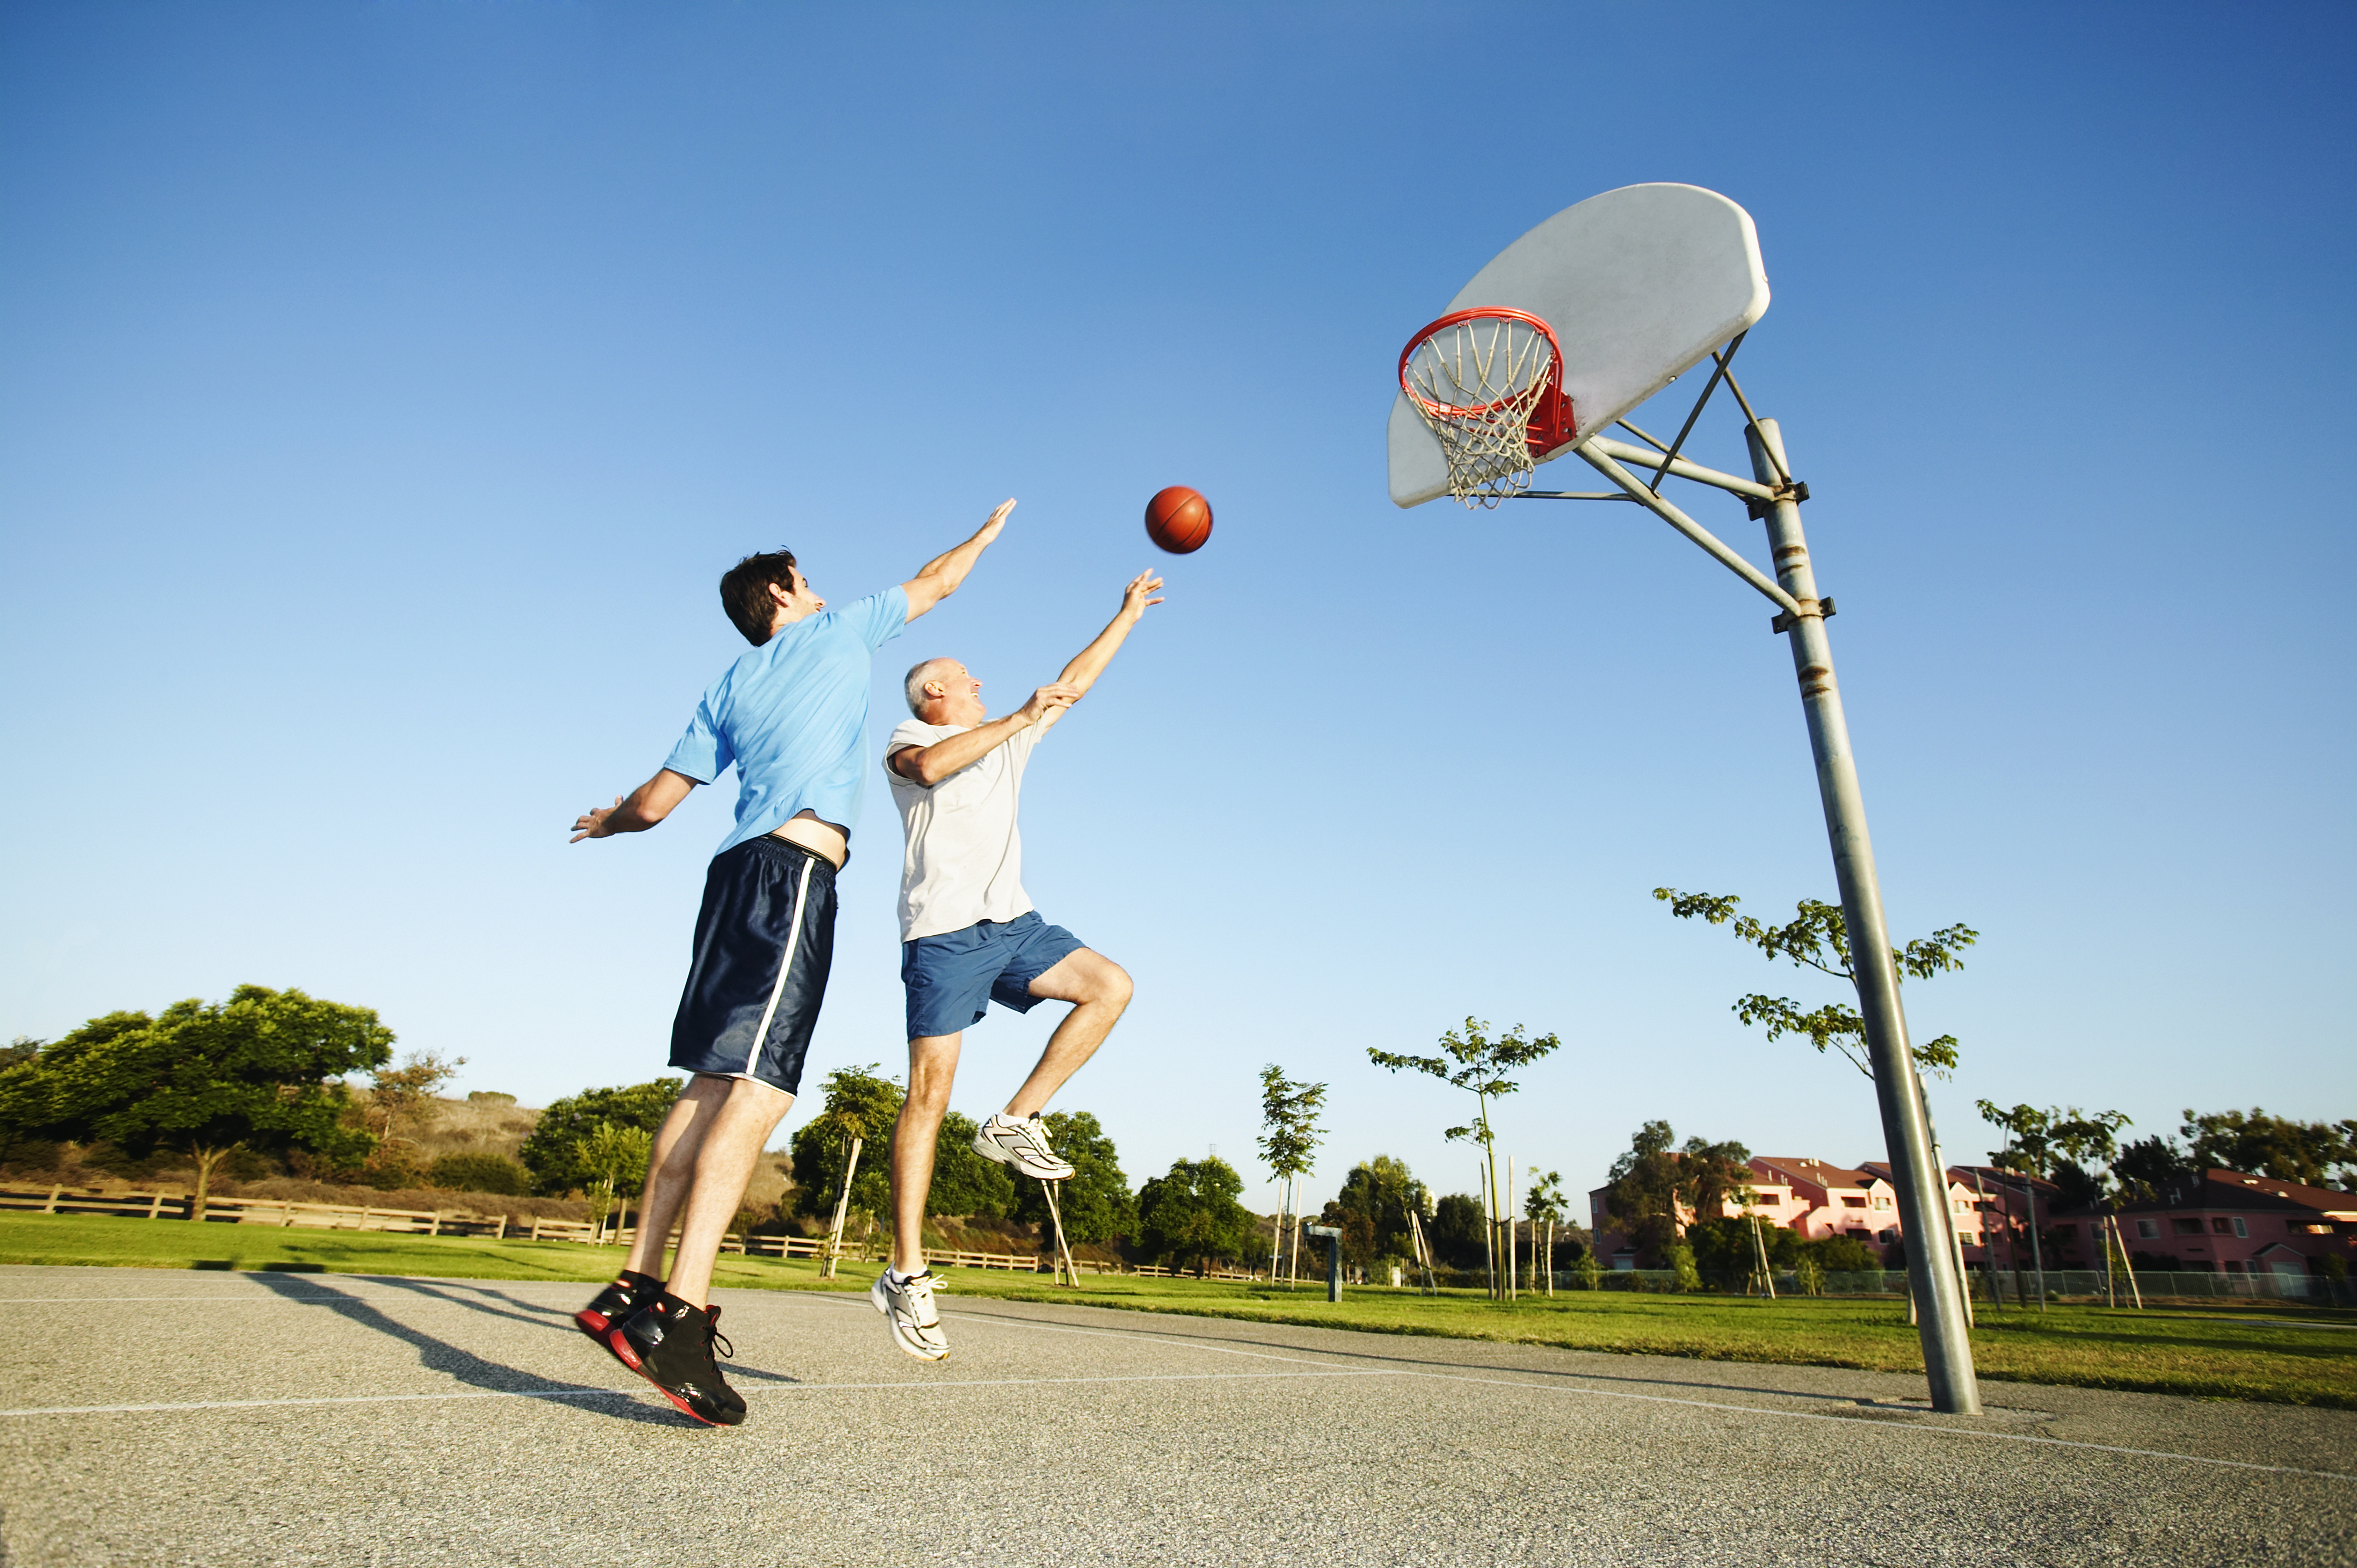 Two people are in a basketball court